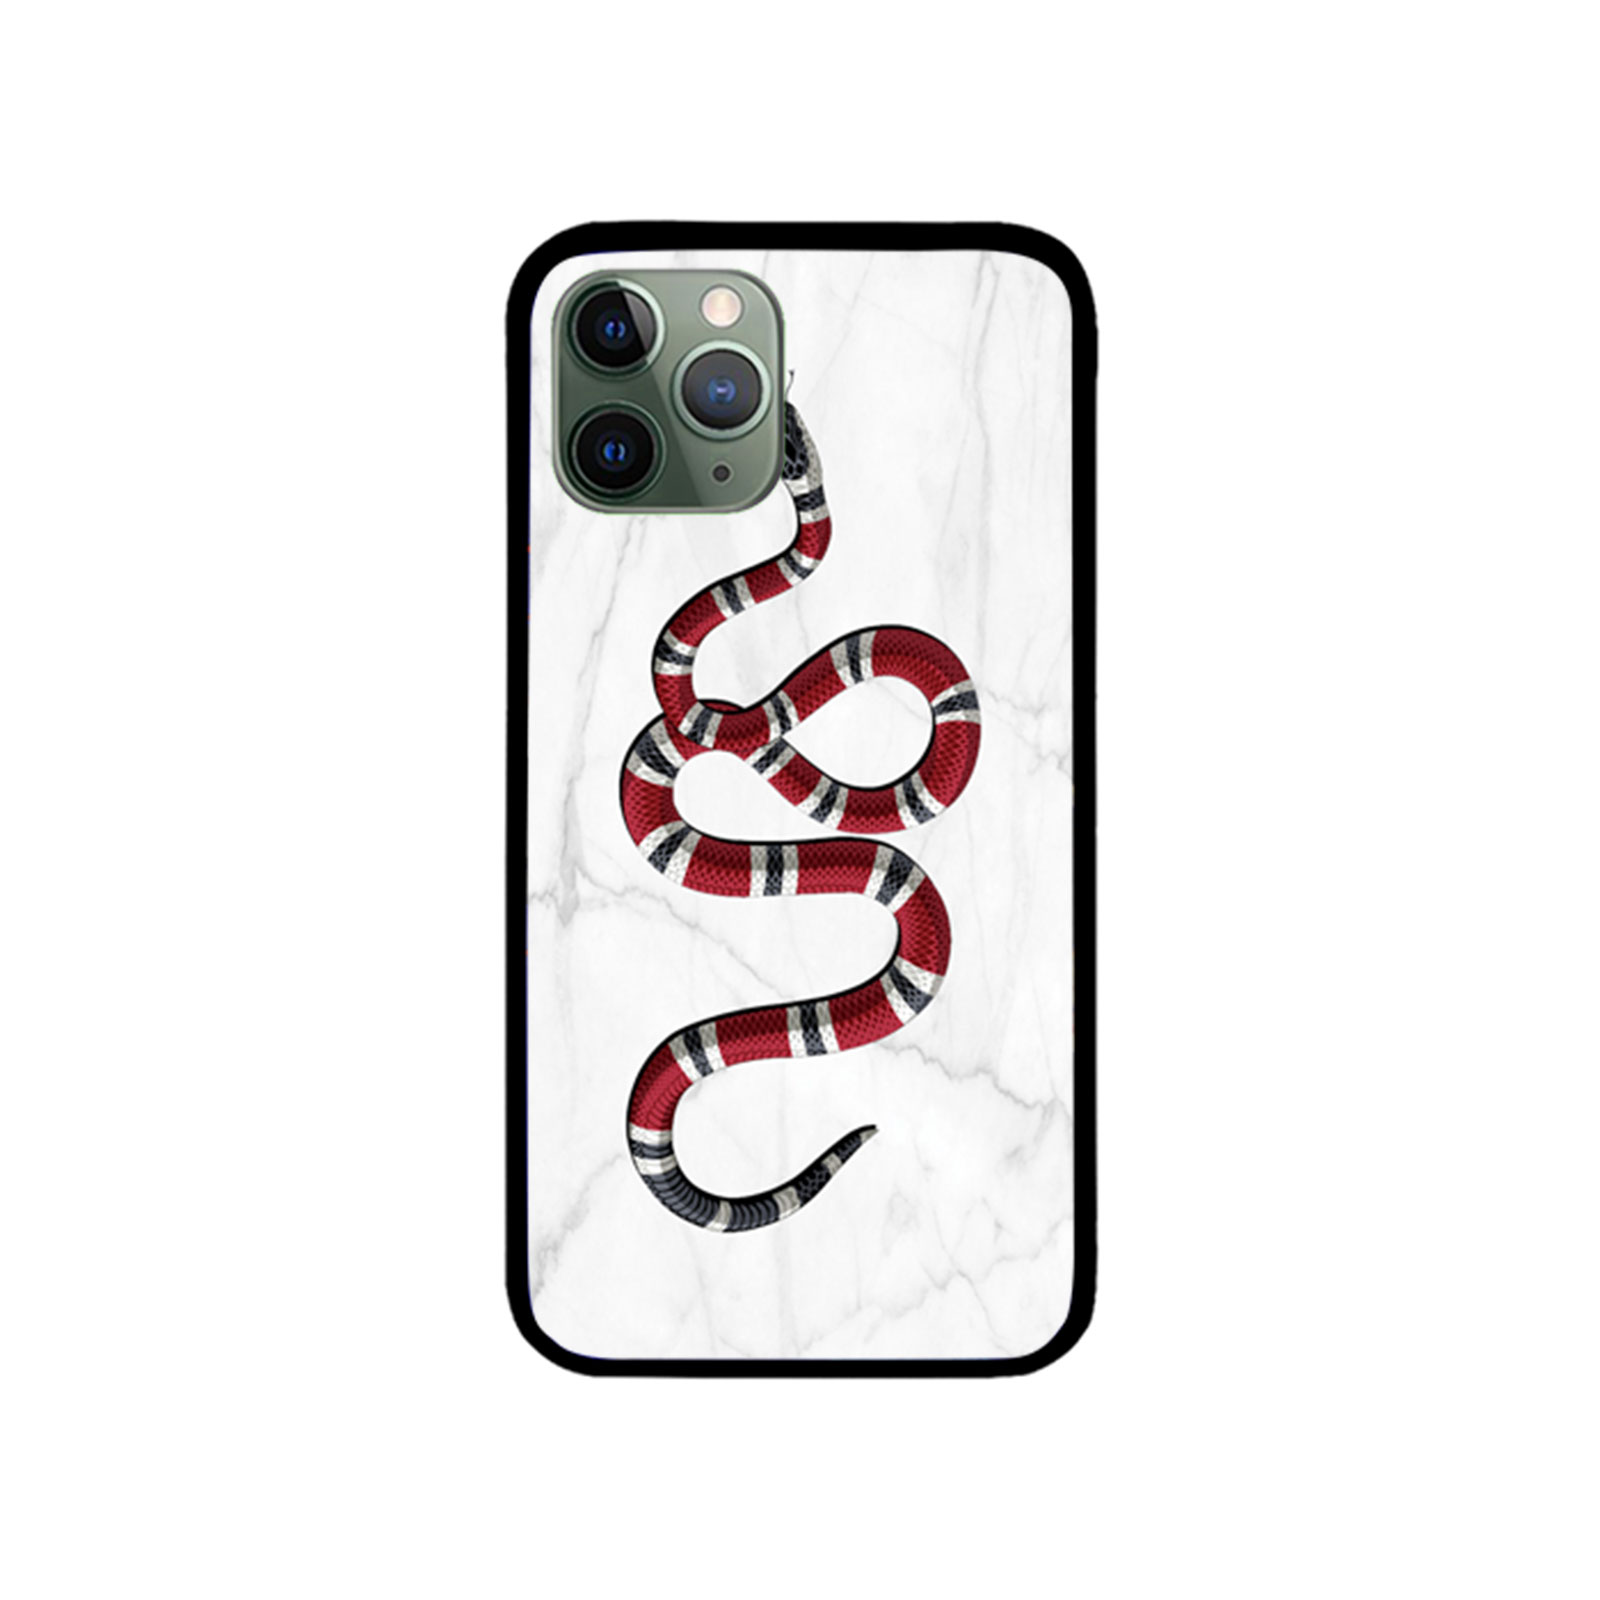 Lys stress slack Gucci Marble iPhone Case 11,X,XS,XR,8,7,6 and More | Ferolos.com